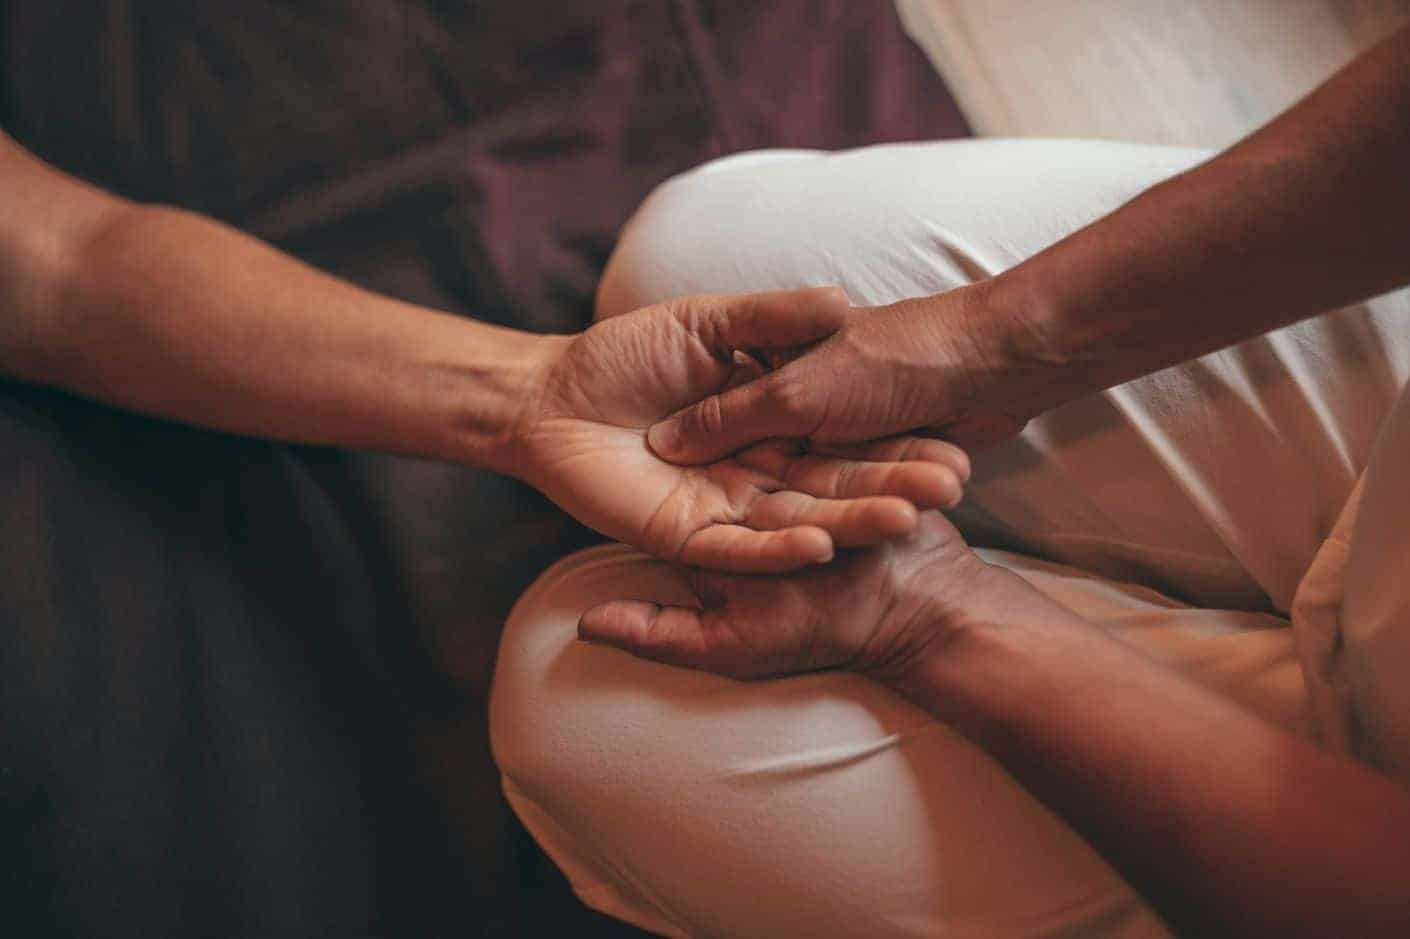 The Energy Cure: Unraveling the Mystery of Hands-On Healing